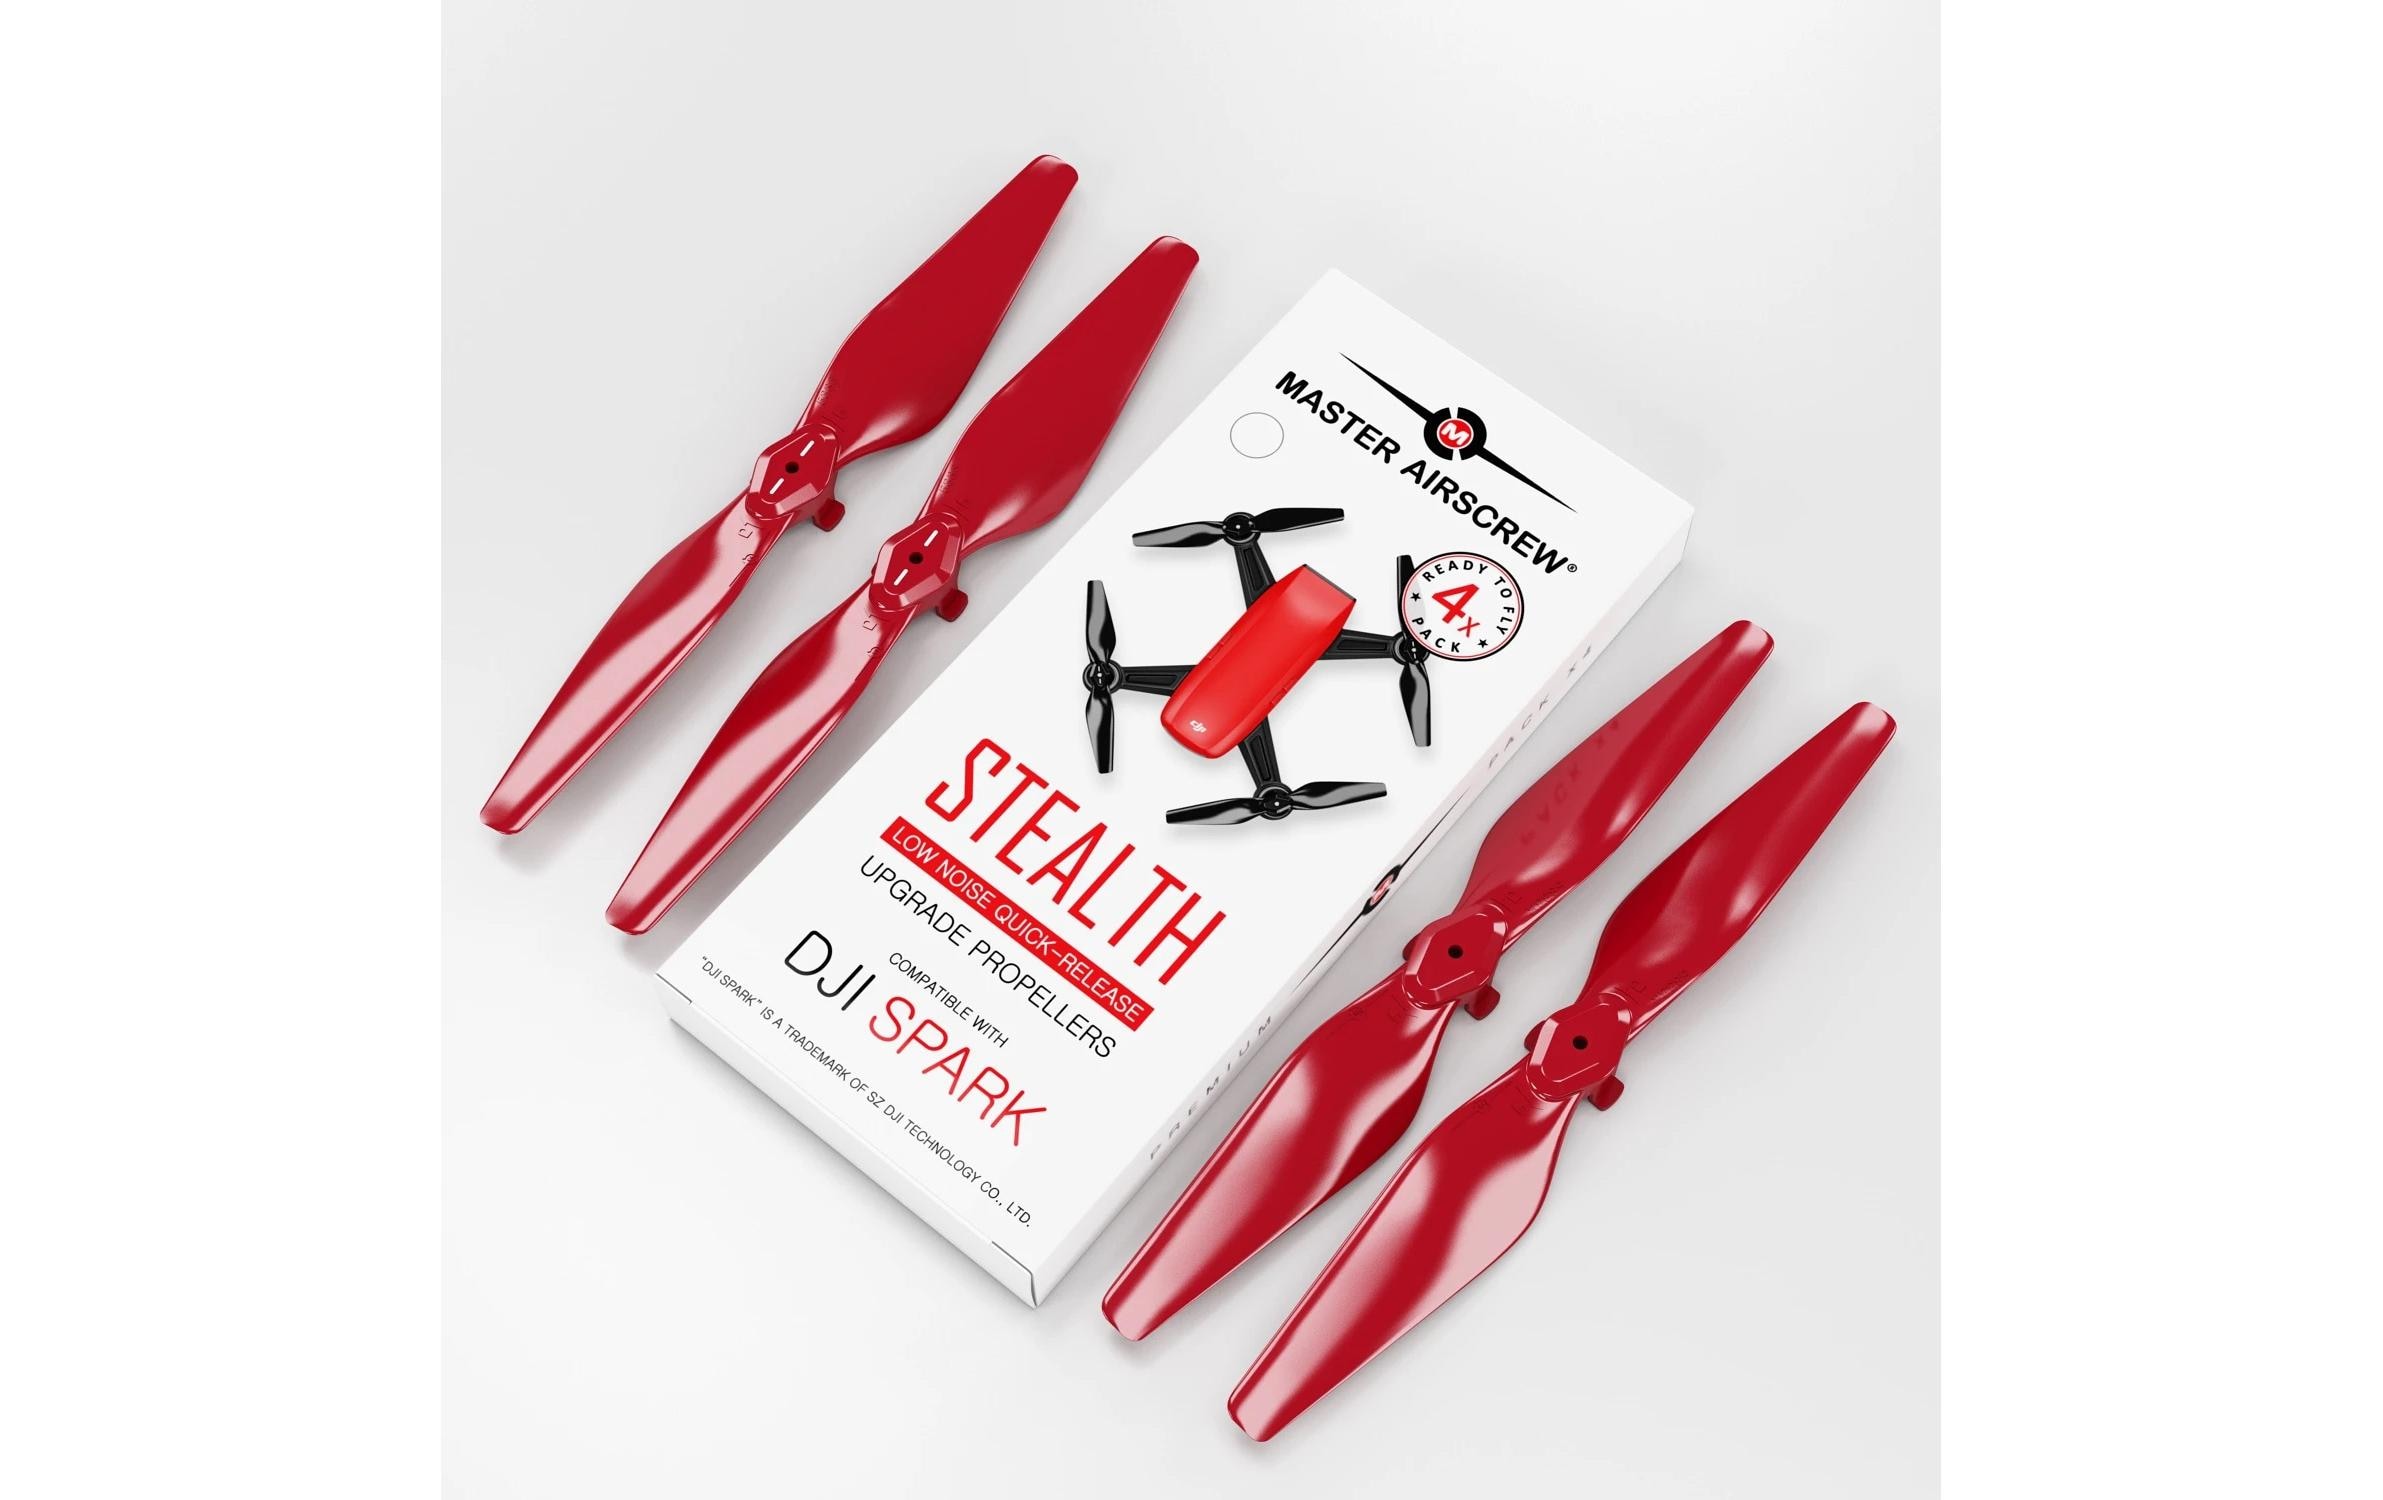 Master Airscrew Propeller Stealth 4.7x2.9 Rot Spark